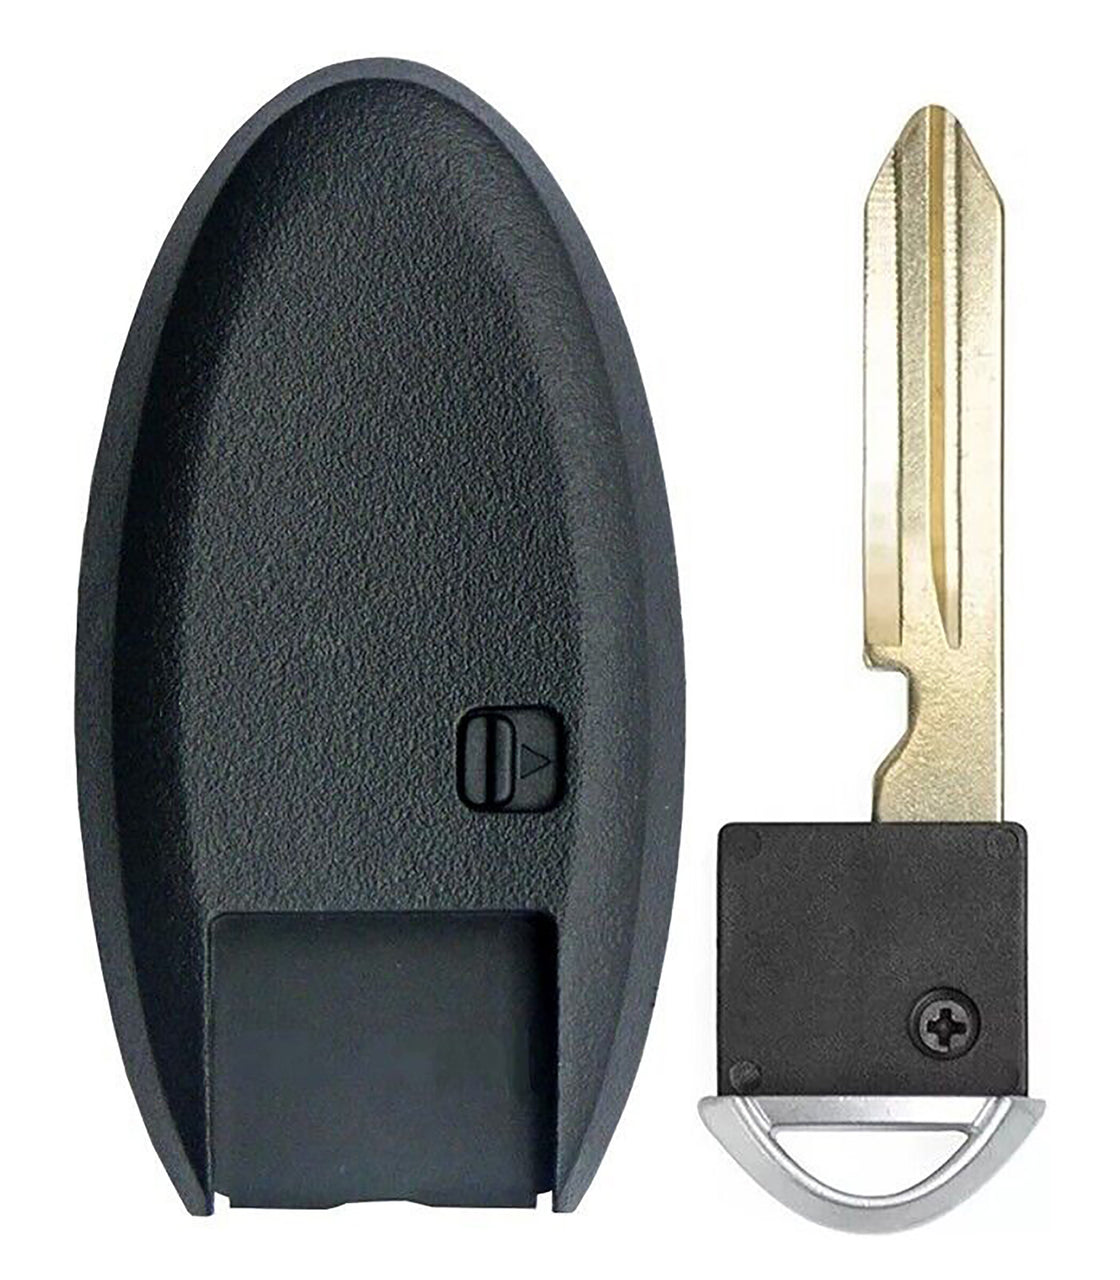 1x New Replacement Proximity Key Fob SHELL / CASE Compatible with & Fit For Nissan Infiniti - MPN CWTW-SHELL-02 (NO electronics or Chip inside)